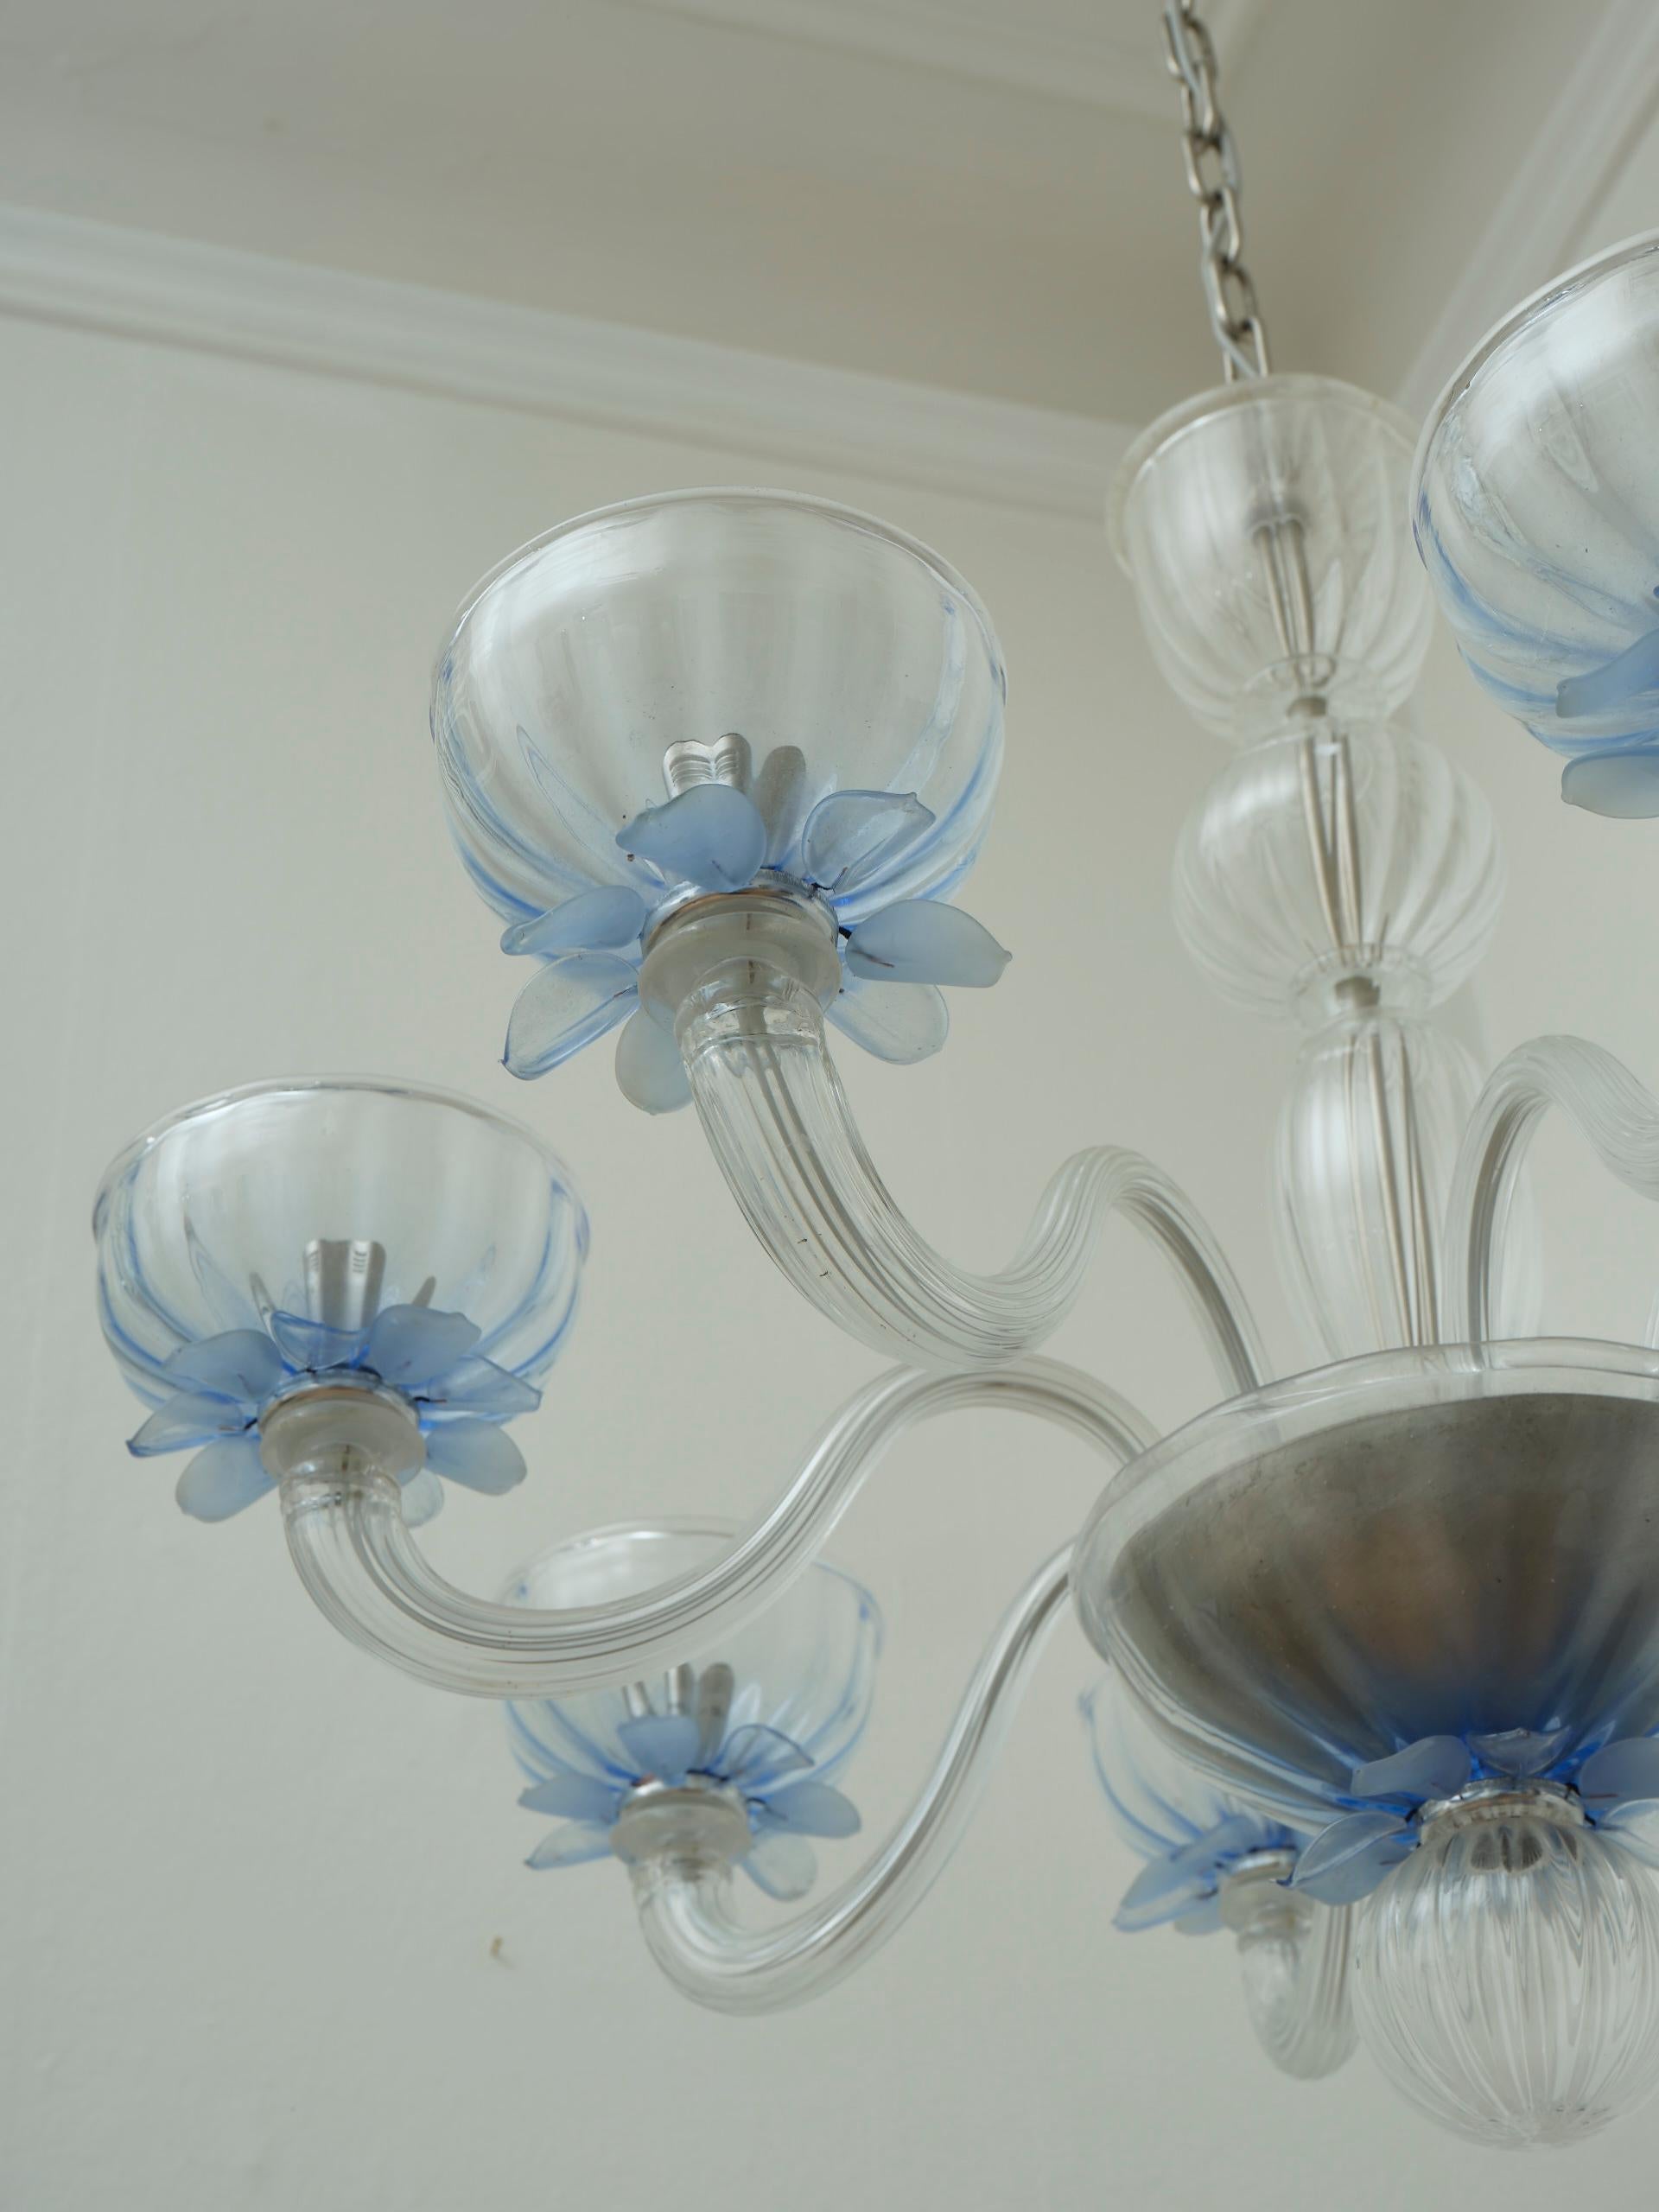 Giant European glass chandelier 8 arms blue details in the style of Murano For Sale 2